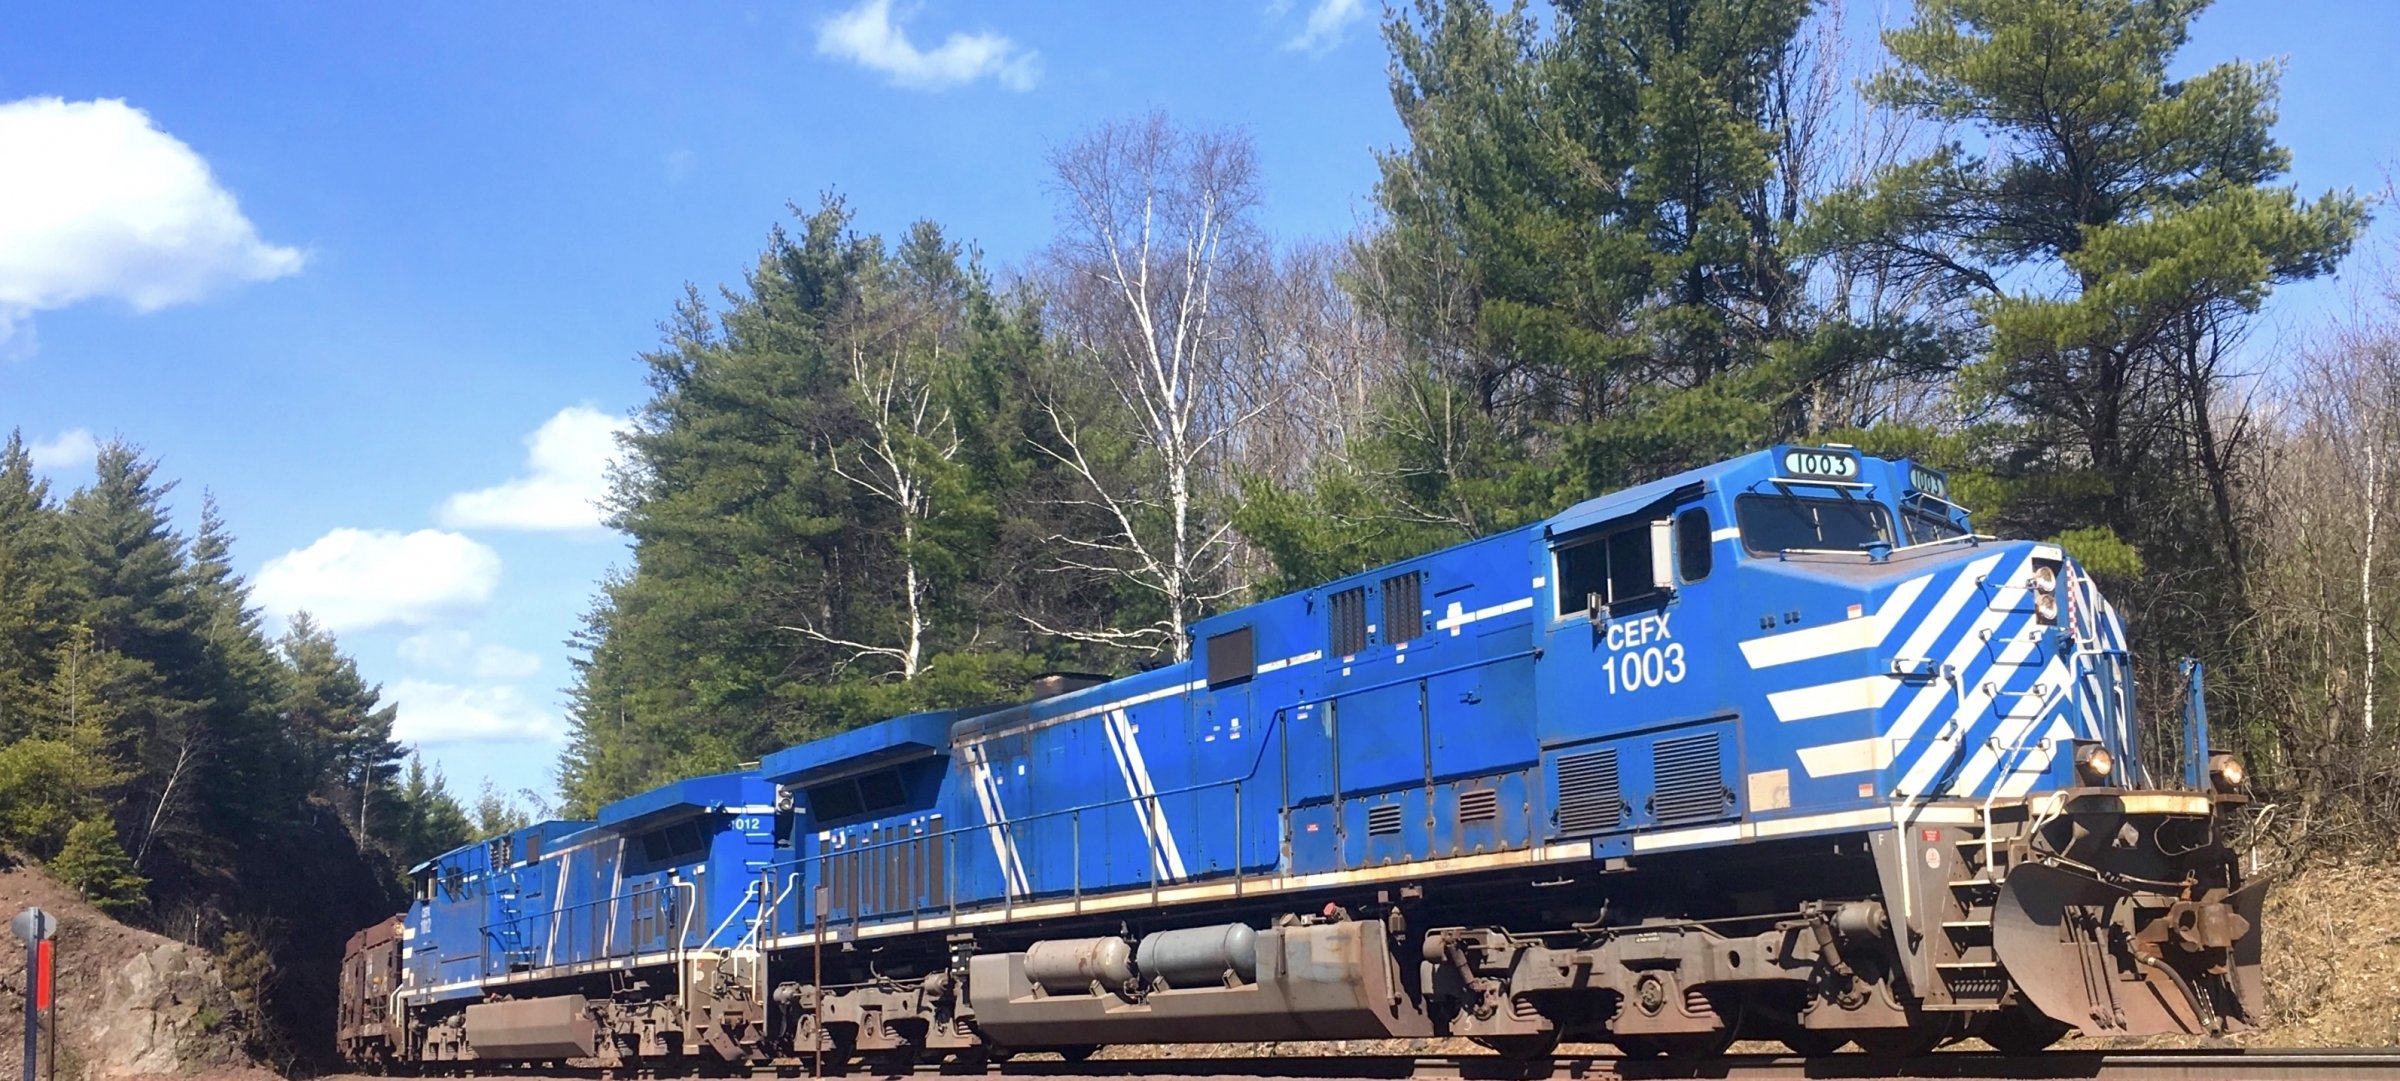 Blue locomotive emerging from wooded land.